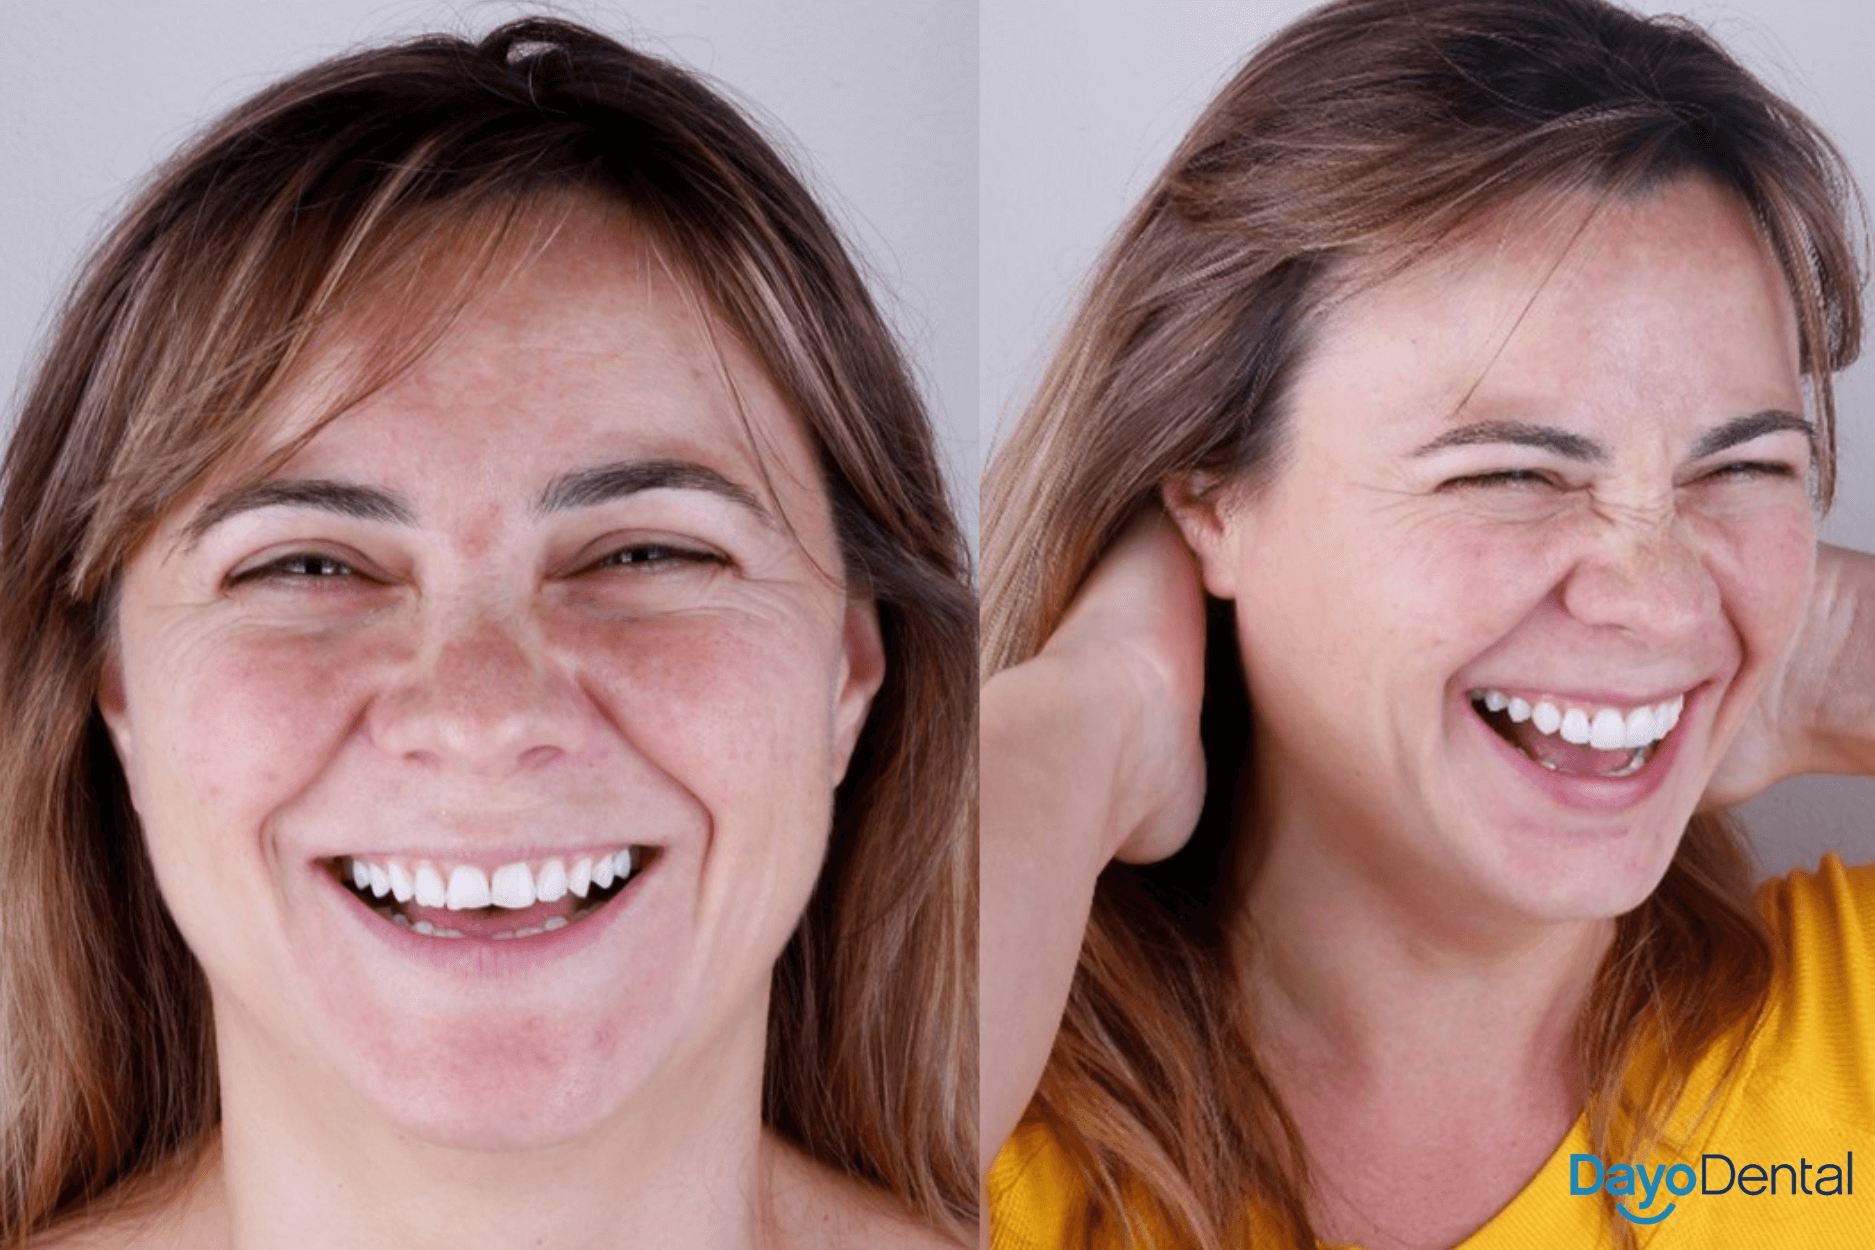 Before and After Ceramic Veneers in mexico